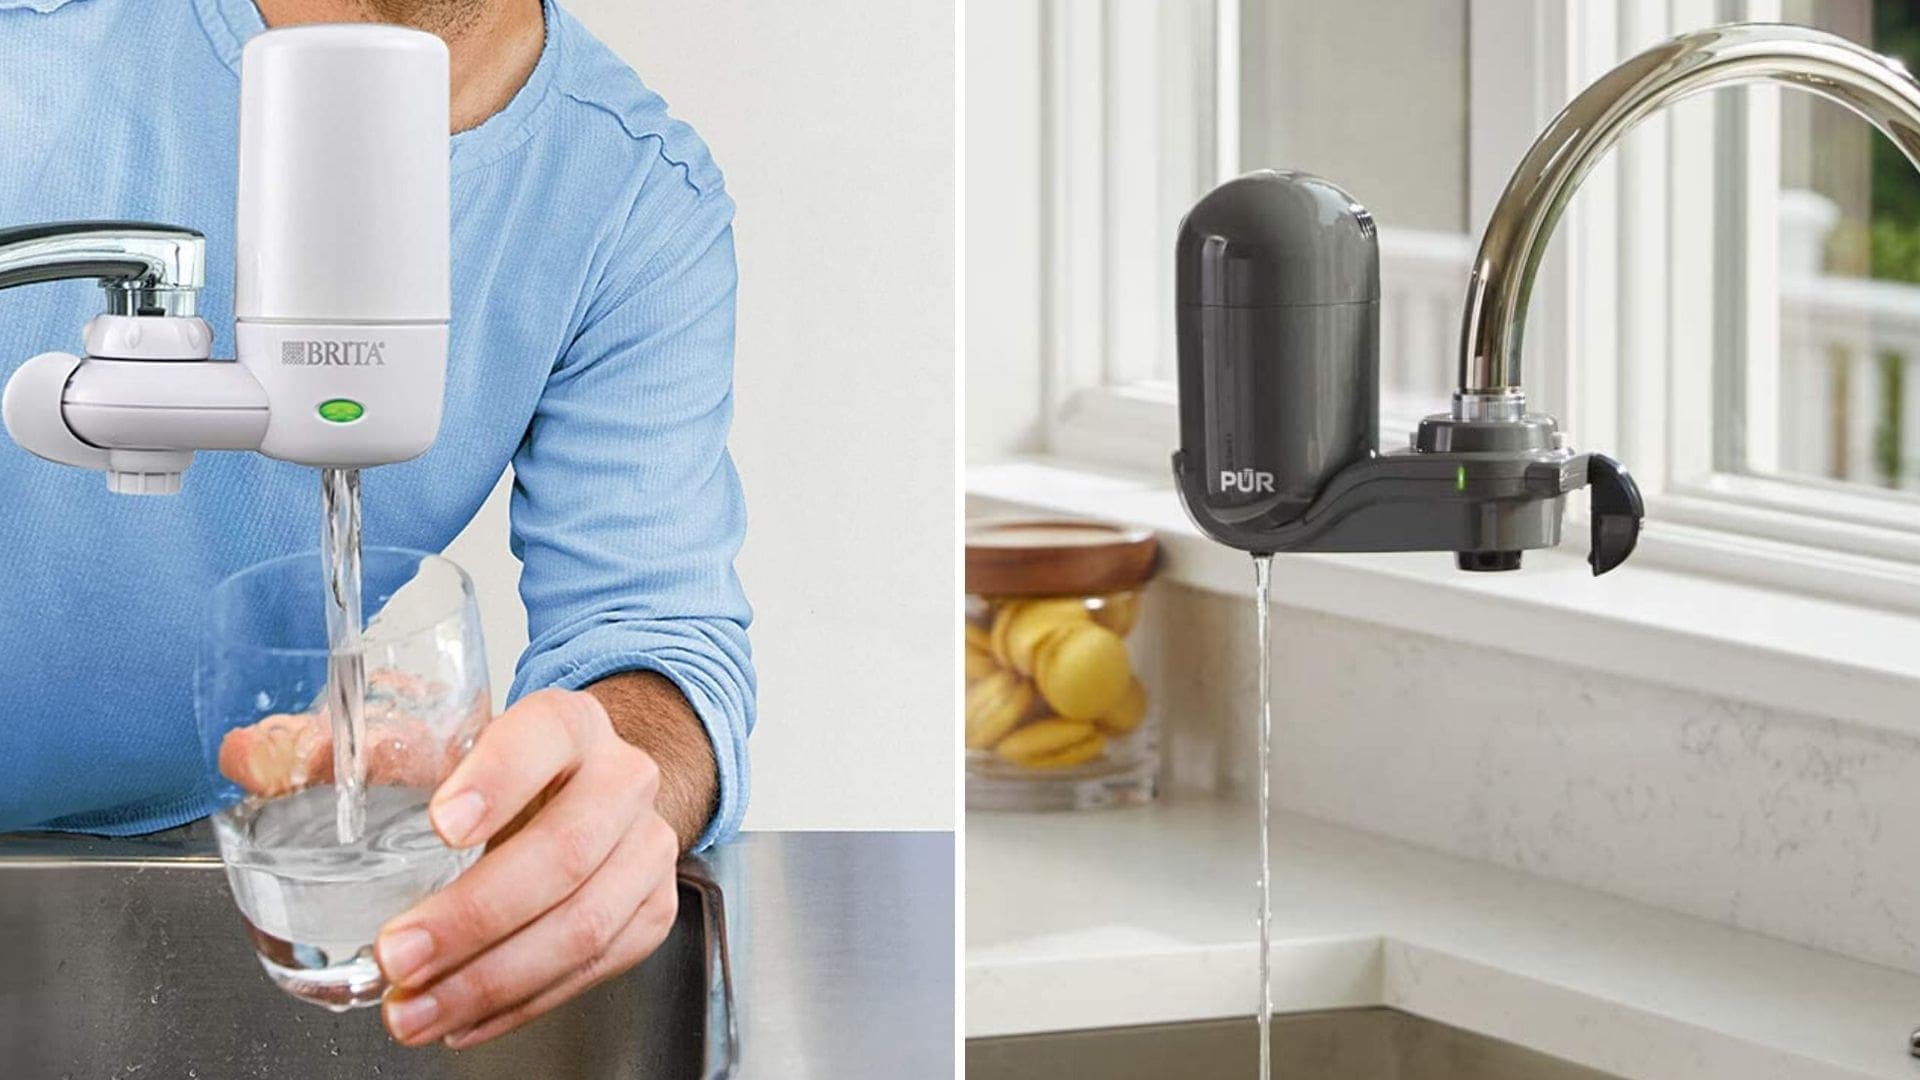 pur water filter for the kitchen sink